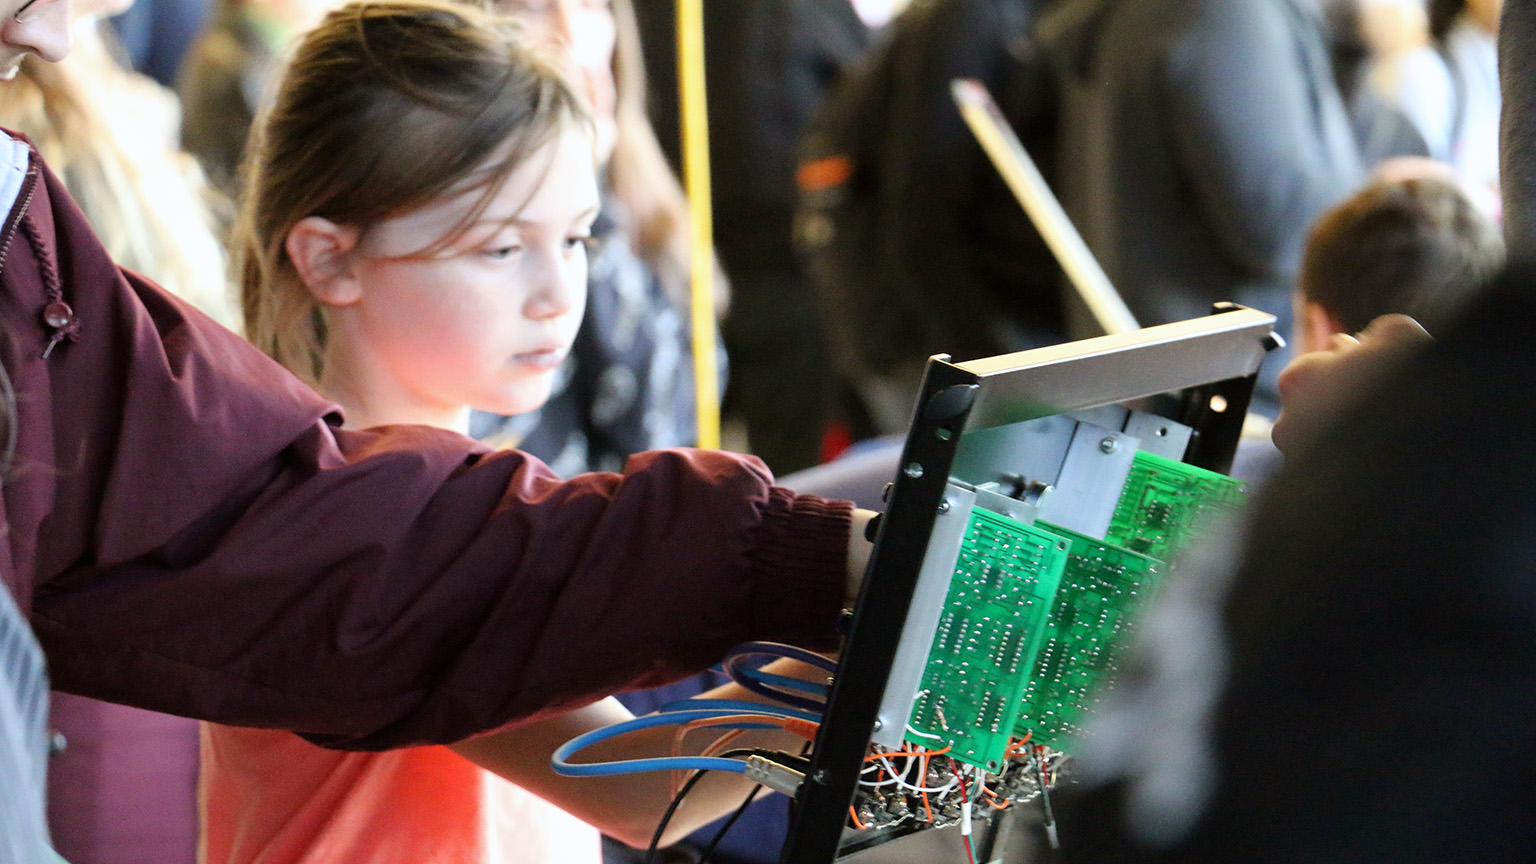 A girl reaching out to touch a panel with circuitry attached to it.